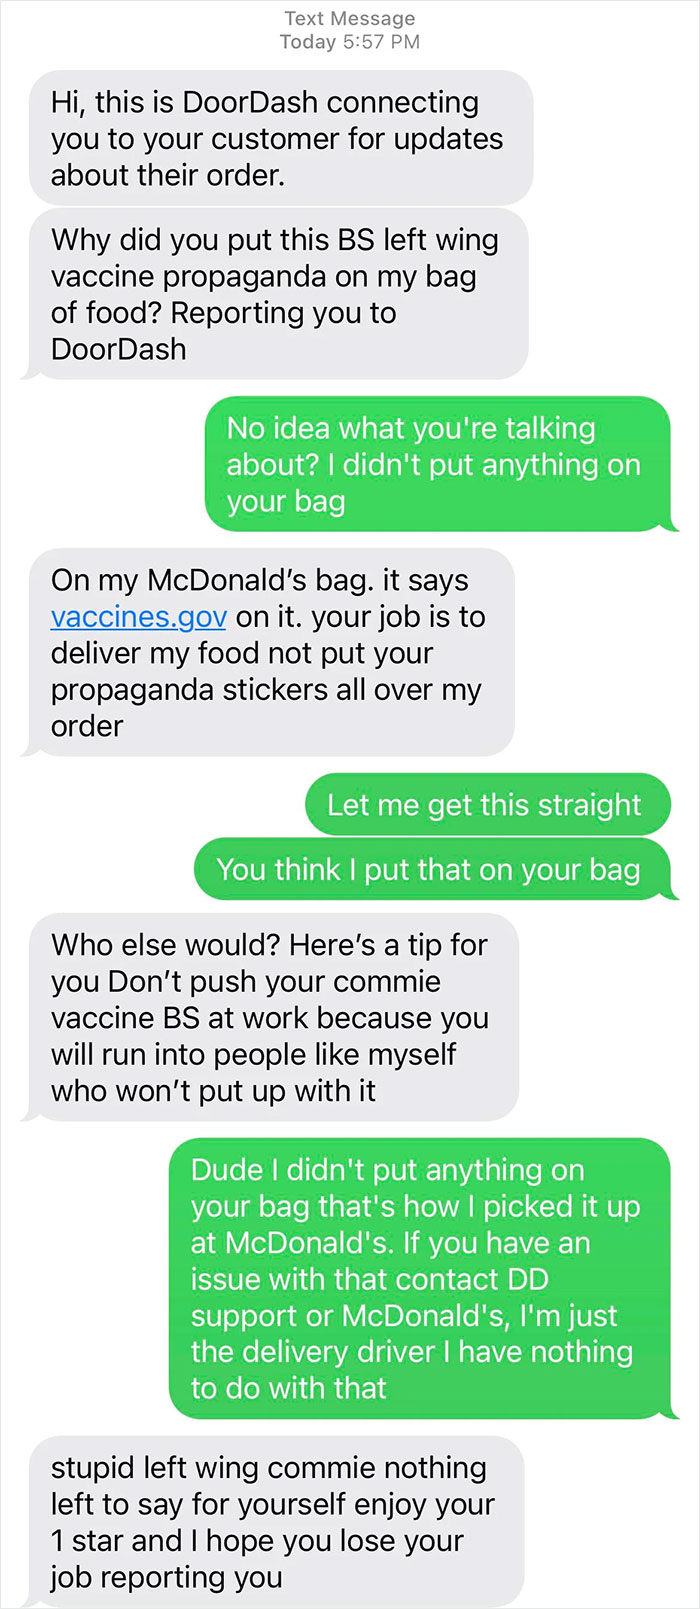 Mcdonald’s Changed The Seal On Their Bags To Spread The Word About Getting Vaccinated, Here’s How That’s Going